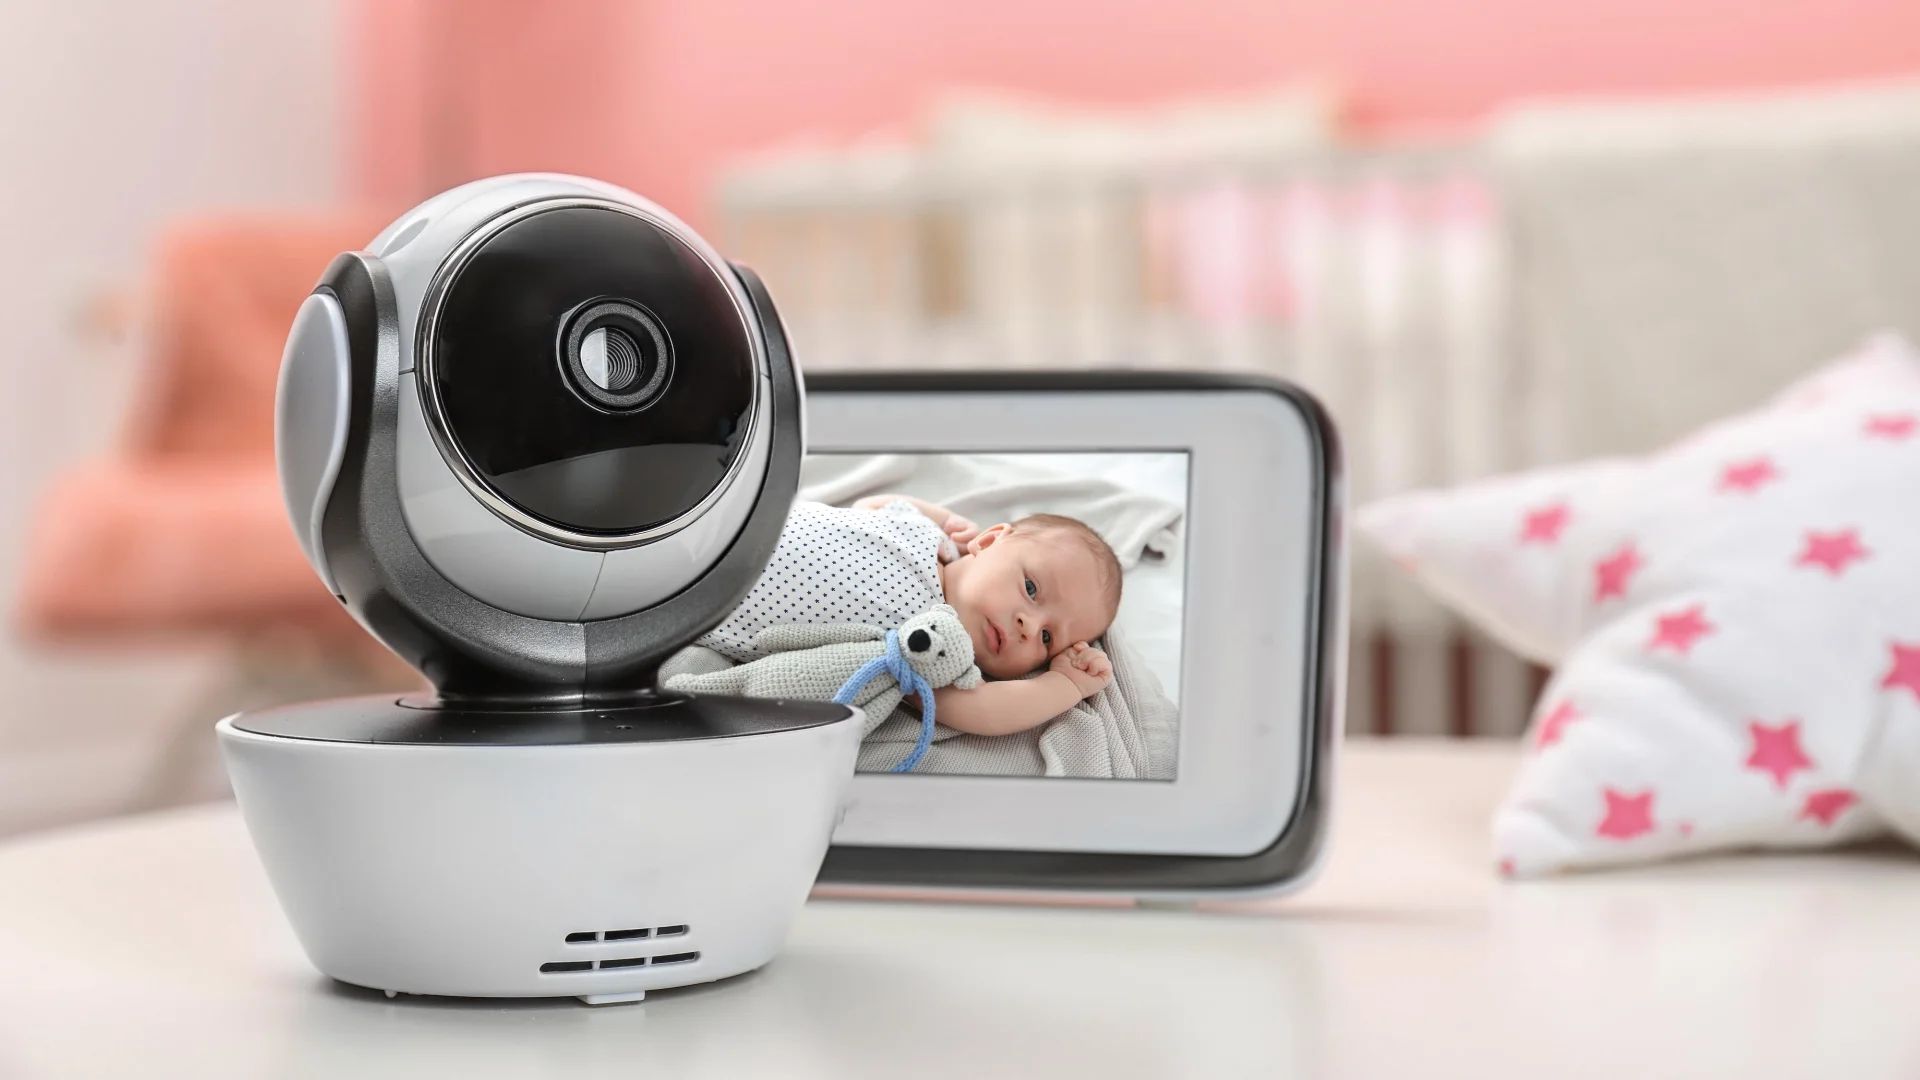 What Does Vox Mean on Baby Monitor